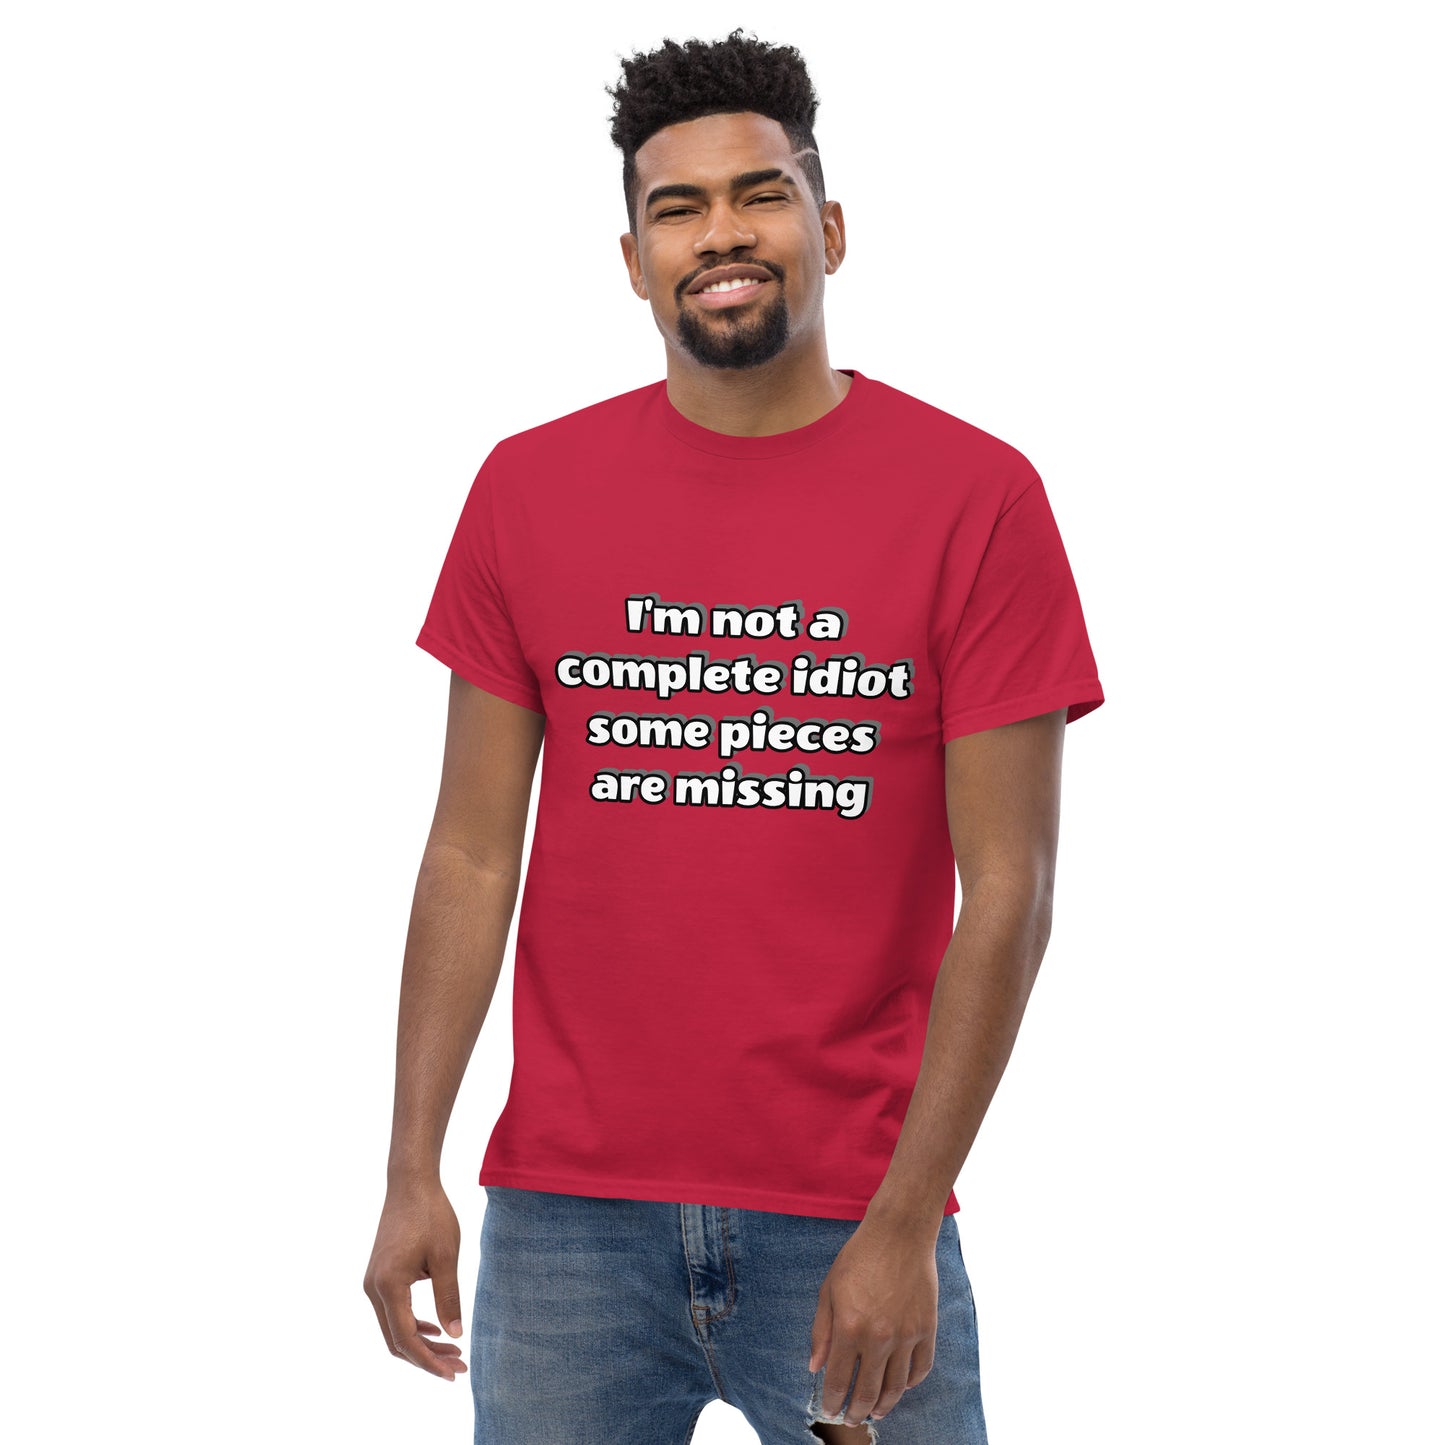 Men with cardinal red t-shirt with text “I’m not a complete idiot, some pieces are missing”